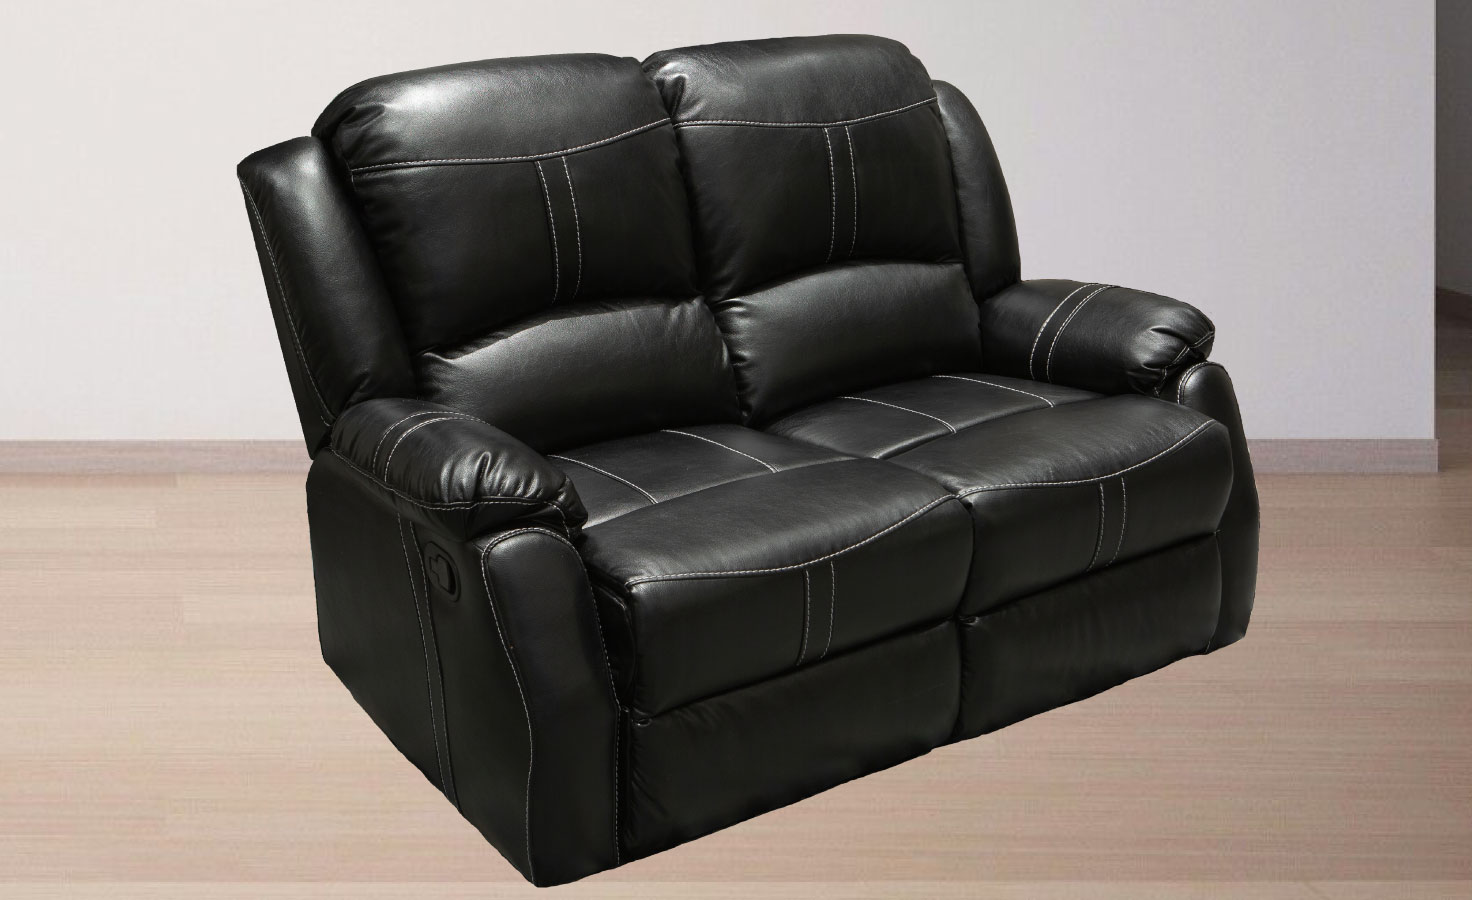 Lorraine BelAire Deluxe Ebony Reclining Loveseat Right Profile Shot by American Home Line